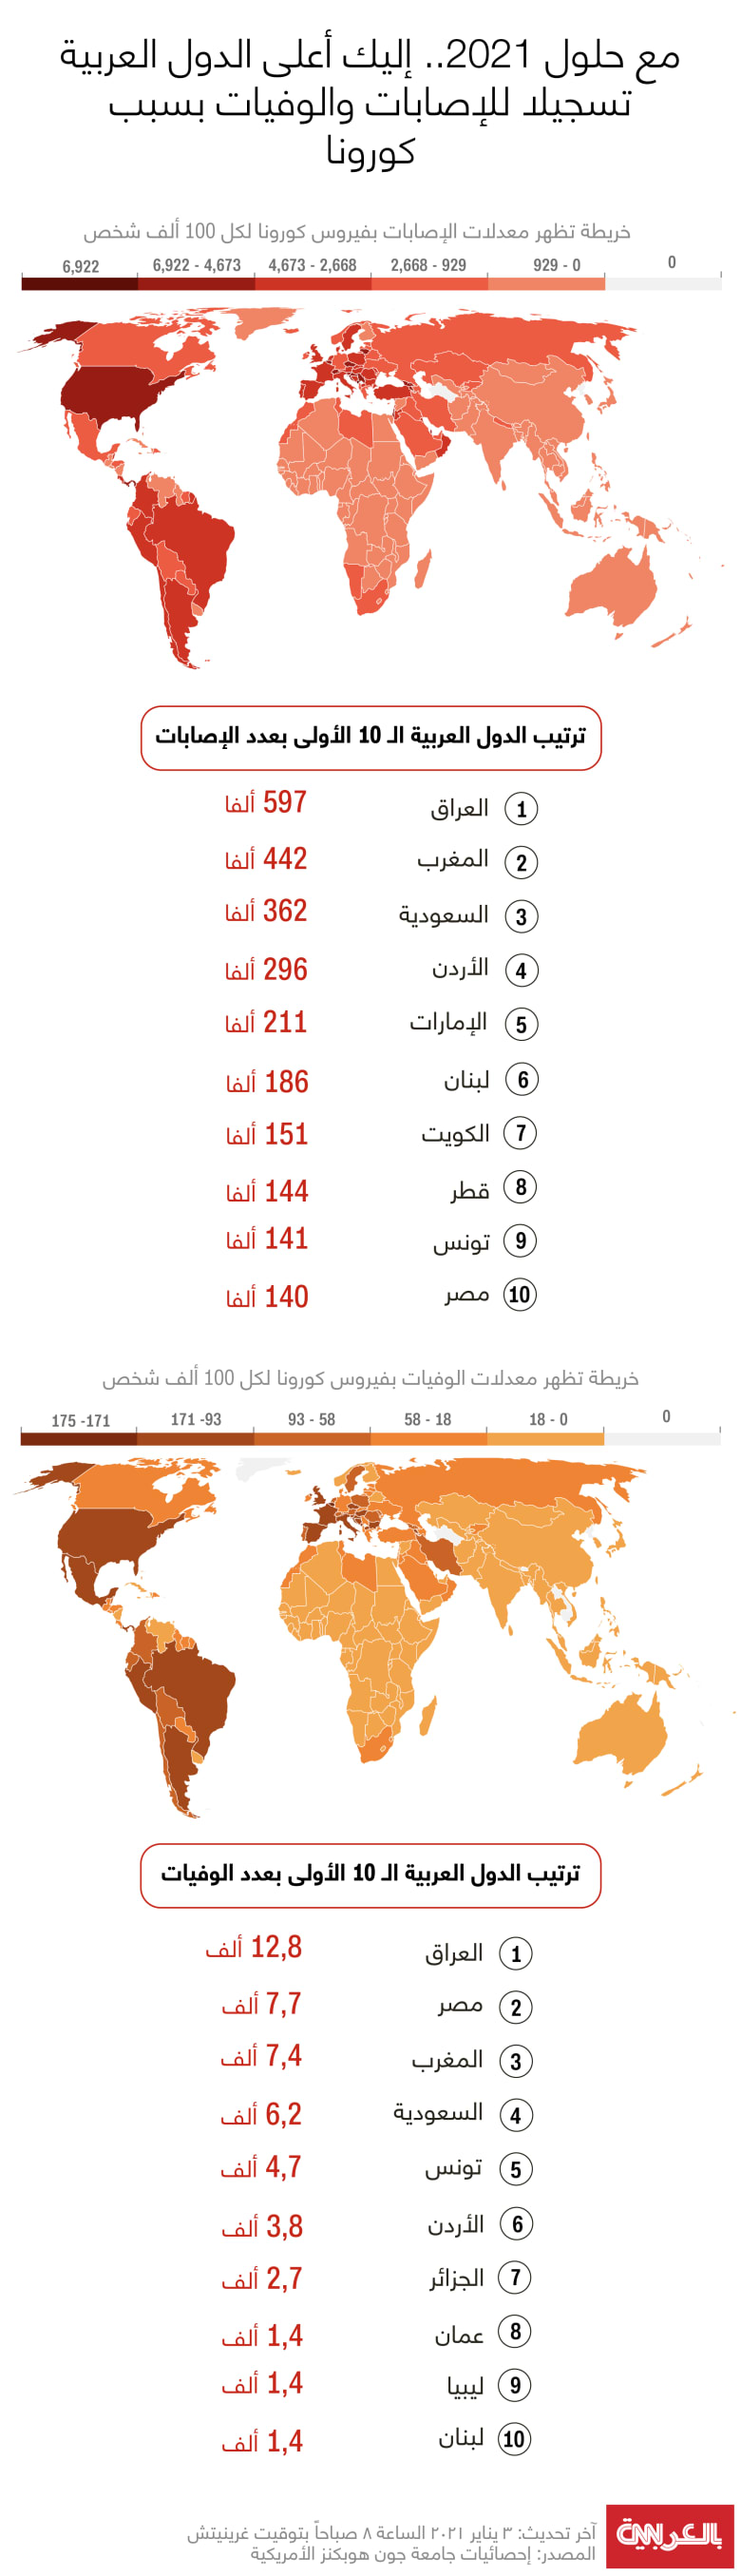 arab-countries-infections-deaths-3-jan